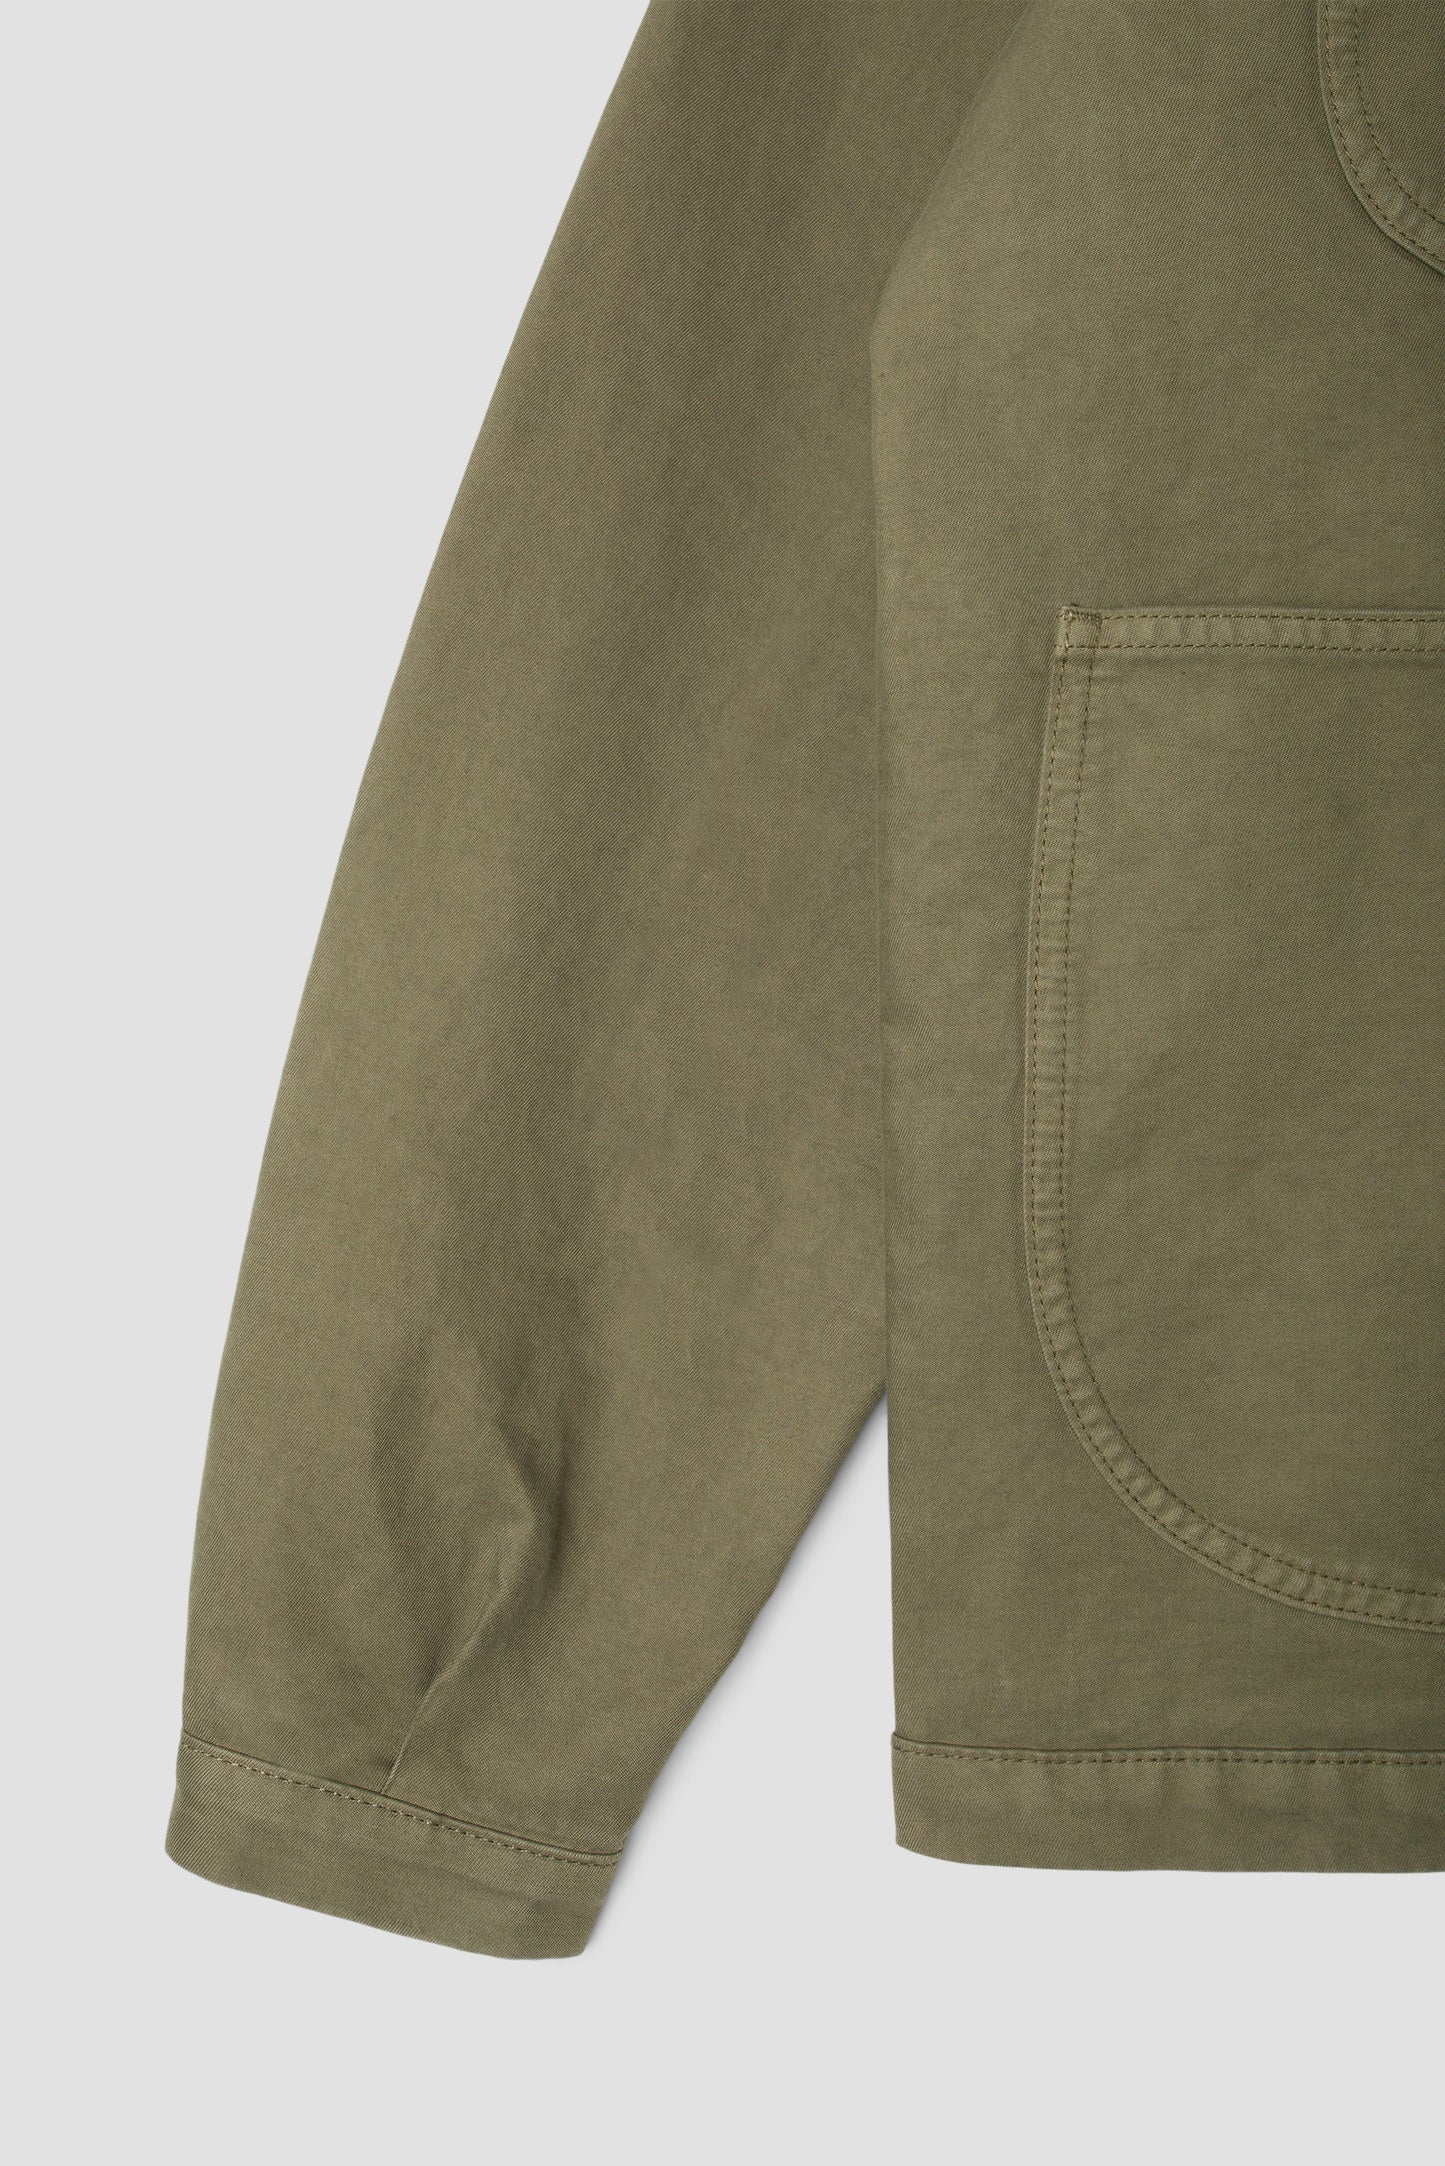 Coverall Jacket, Unlined (Olive Twill)